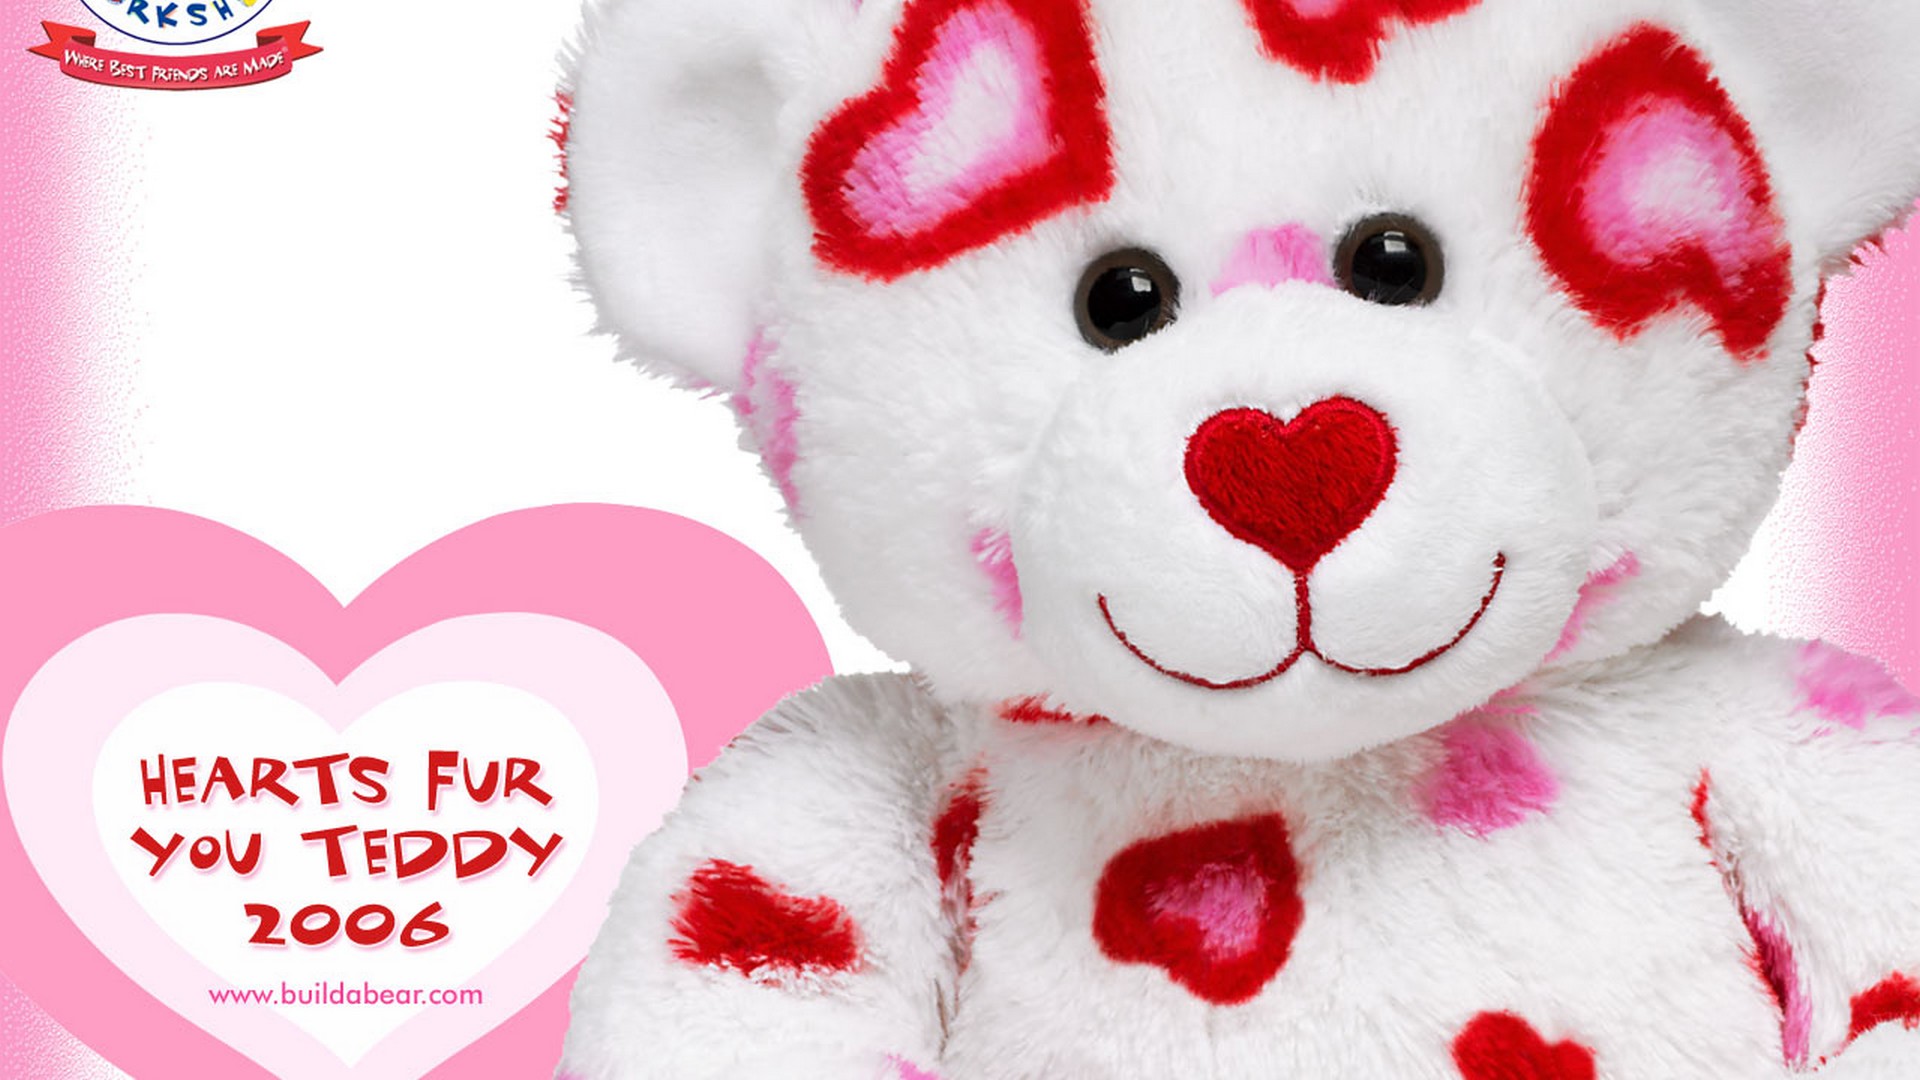 Best Giant Teddy Bear Wallpaper With Image Resolution - Feeling Happy With Love - HD Wallpaper 